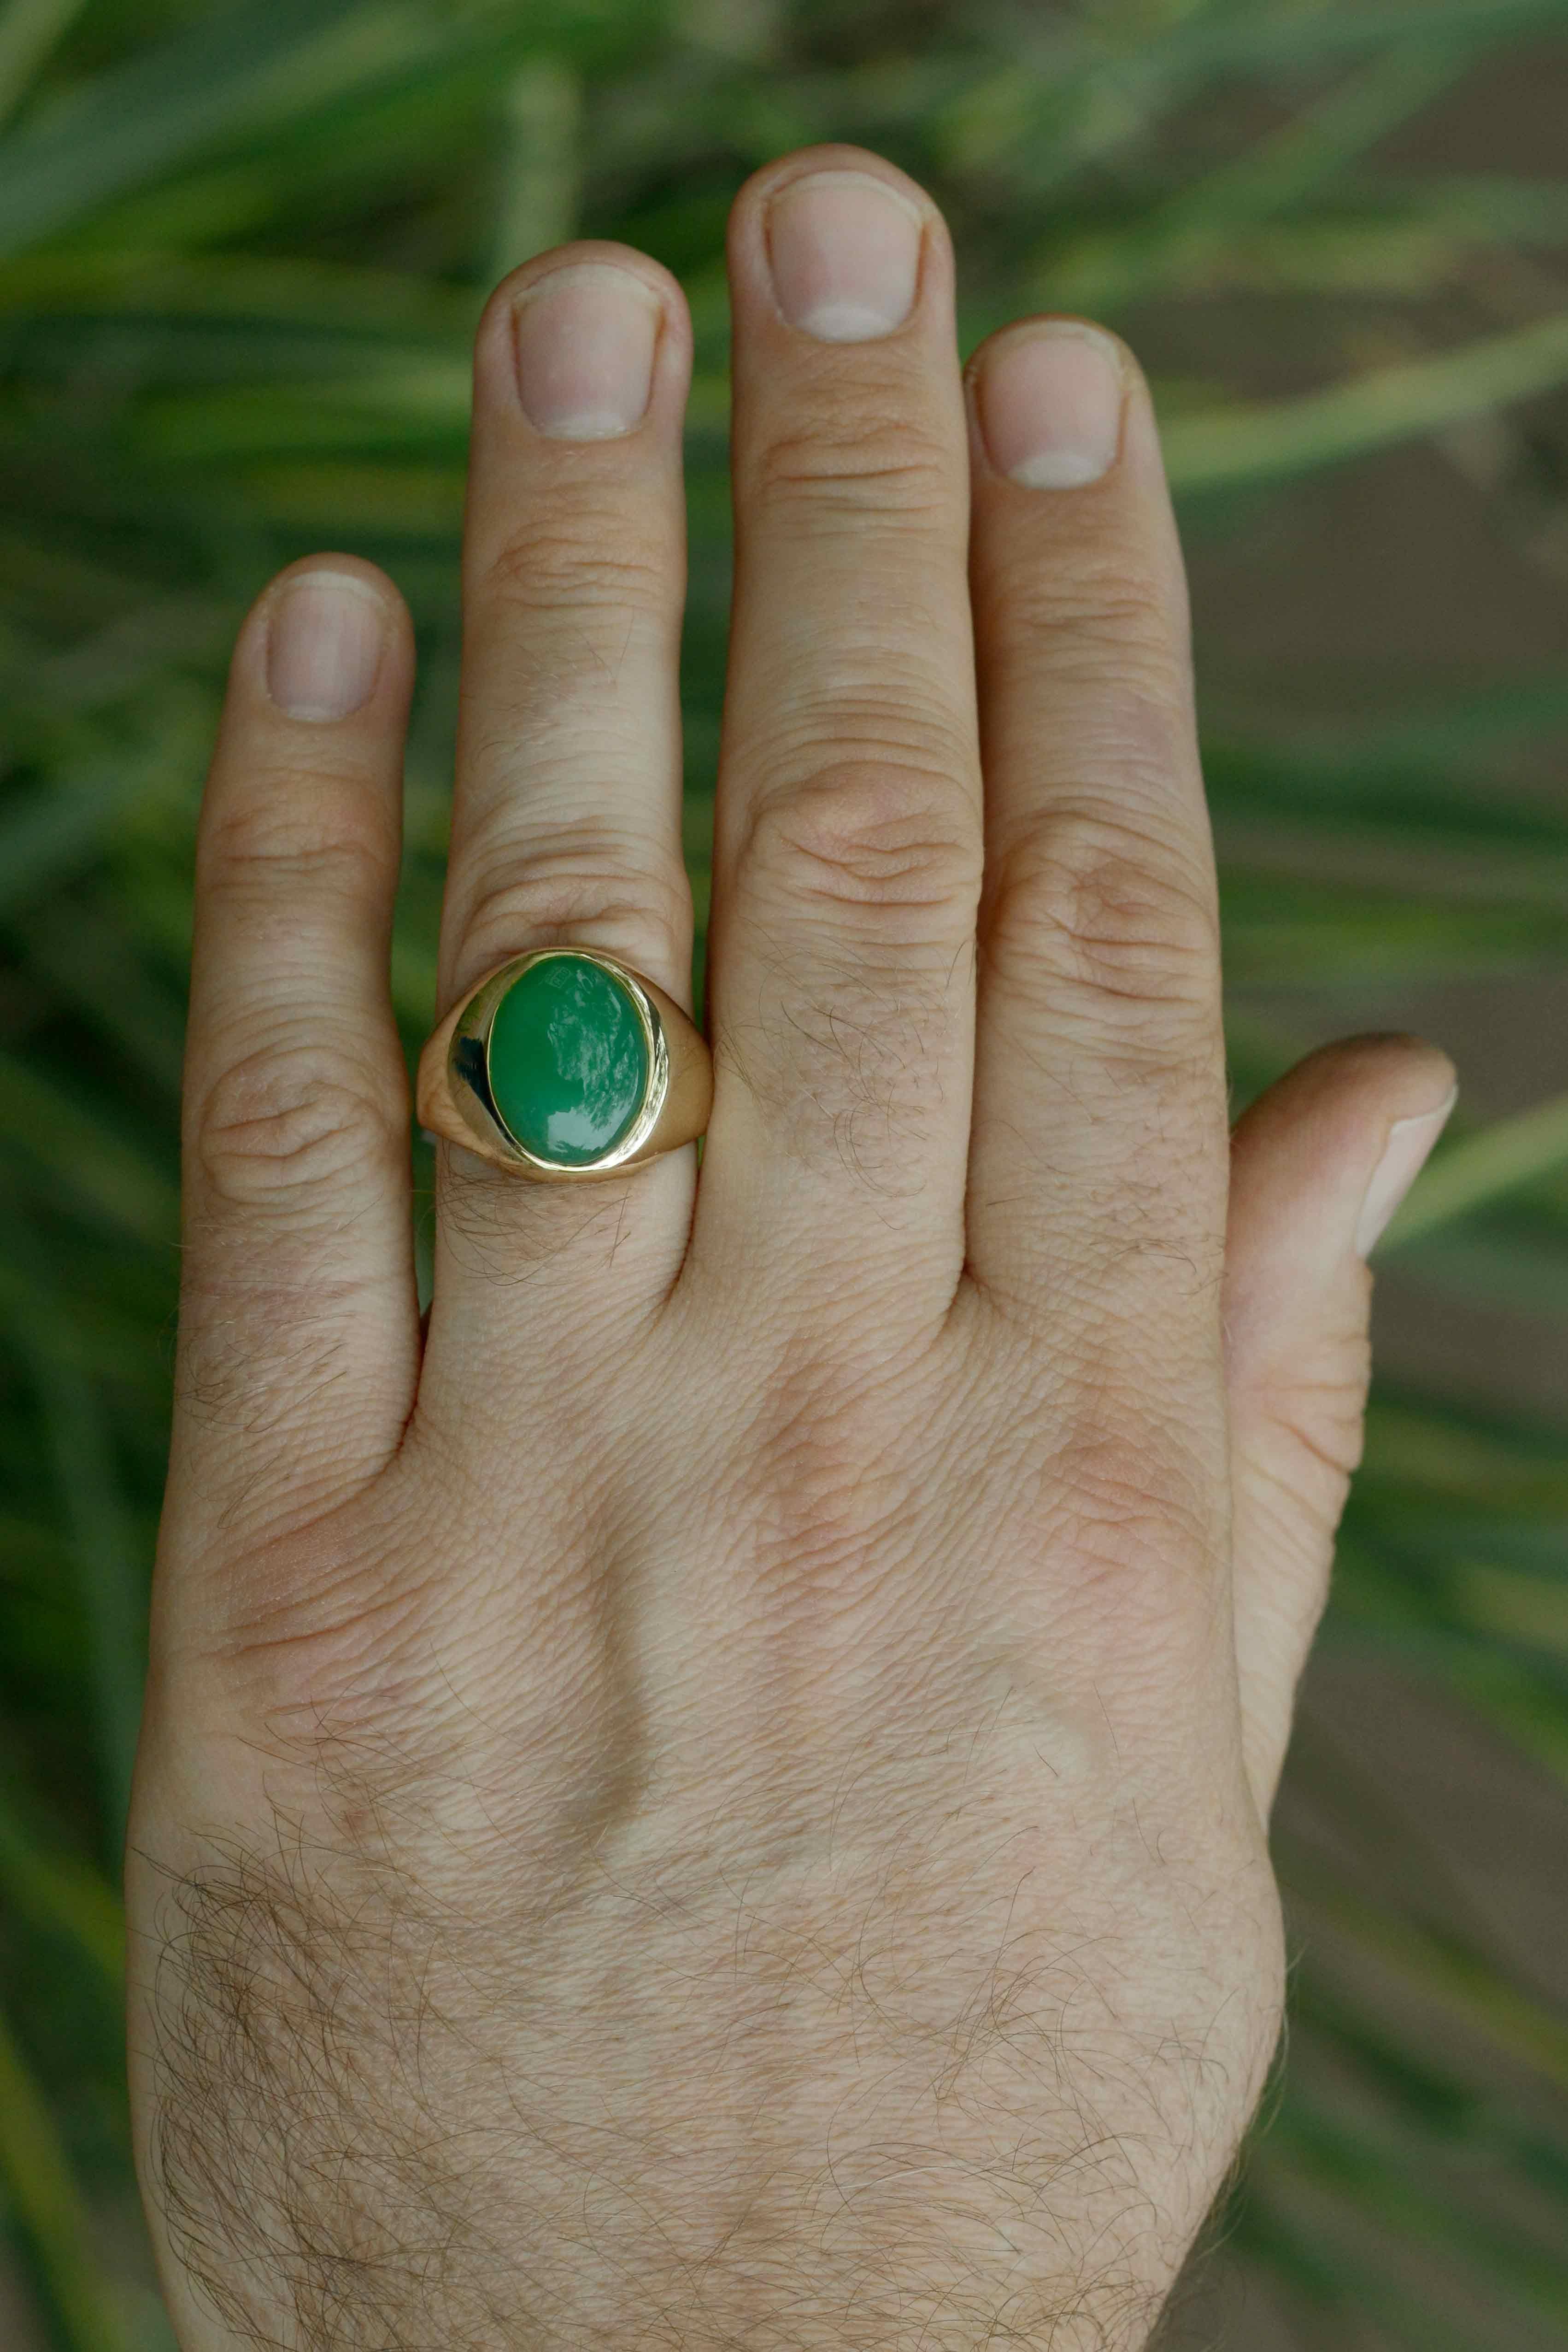 An imperial Burmese jade men's dress ring. Artfully placed in rich 14K yellow gold, the crisp, apple green Burma gemstone supreme is cabochon cut with a subtle yet proud look, possessing even tone with deep saturation of color. Type A Jadeite